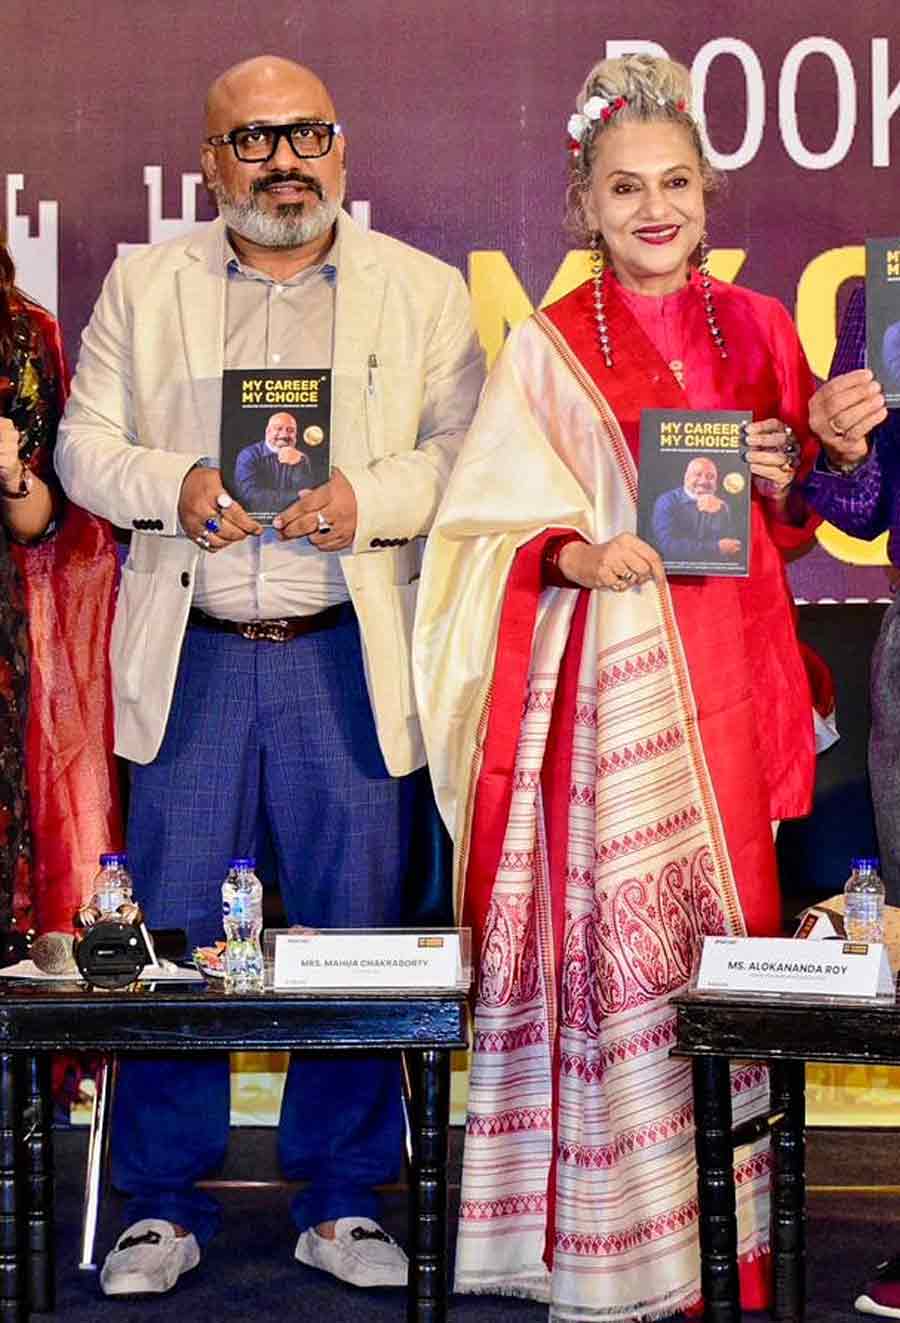 Abhishake De Sarkar launched his book titled "My Career My Choice" on Friday. Eminent dancer and social activist Alokananda Roy was also present at the event held at The Park Hotel   